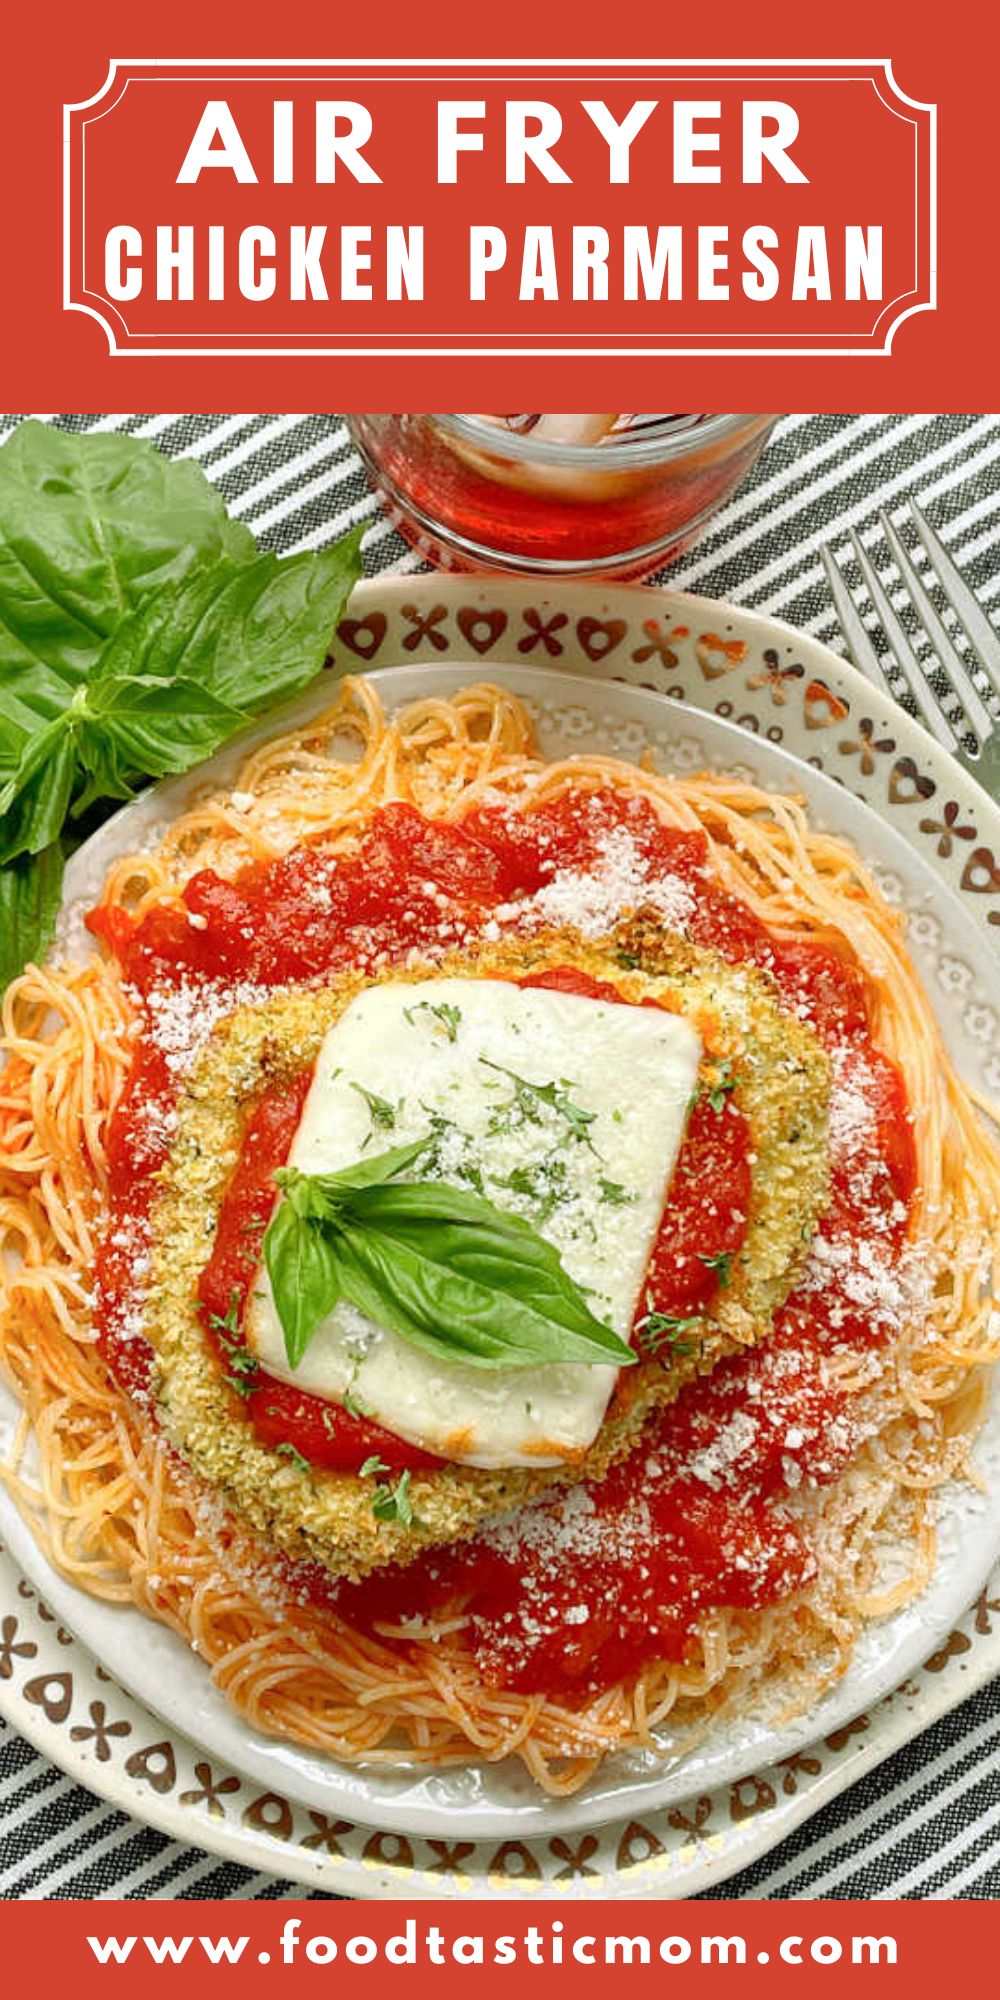 Make Chicken Parm better than a restaurant thanks to this recipe for Air Fryer Chicken Parmesan. So delish, healthy and ready in a flash! via @foodtasticmom